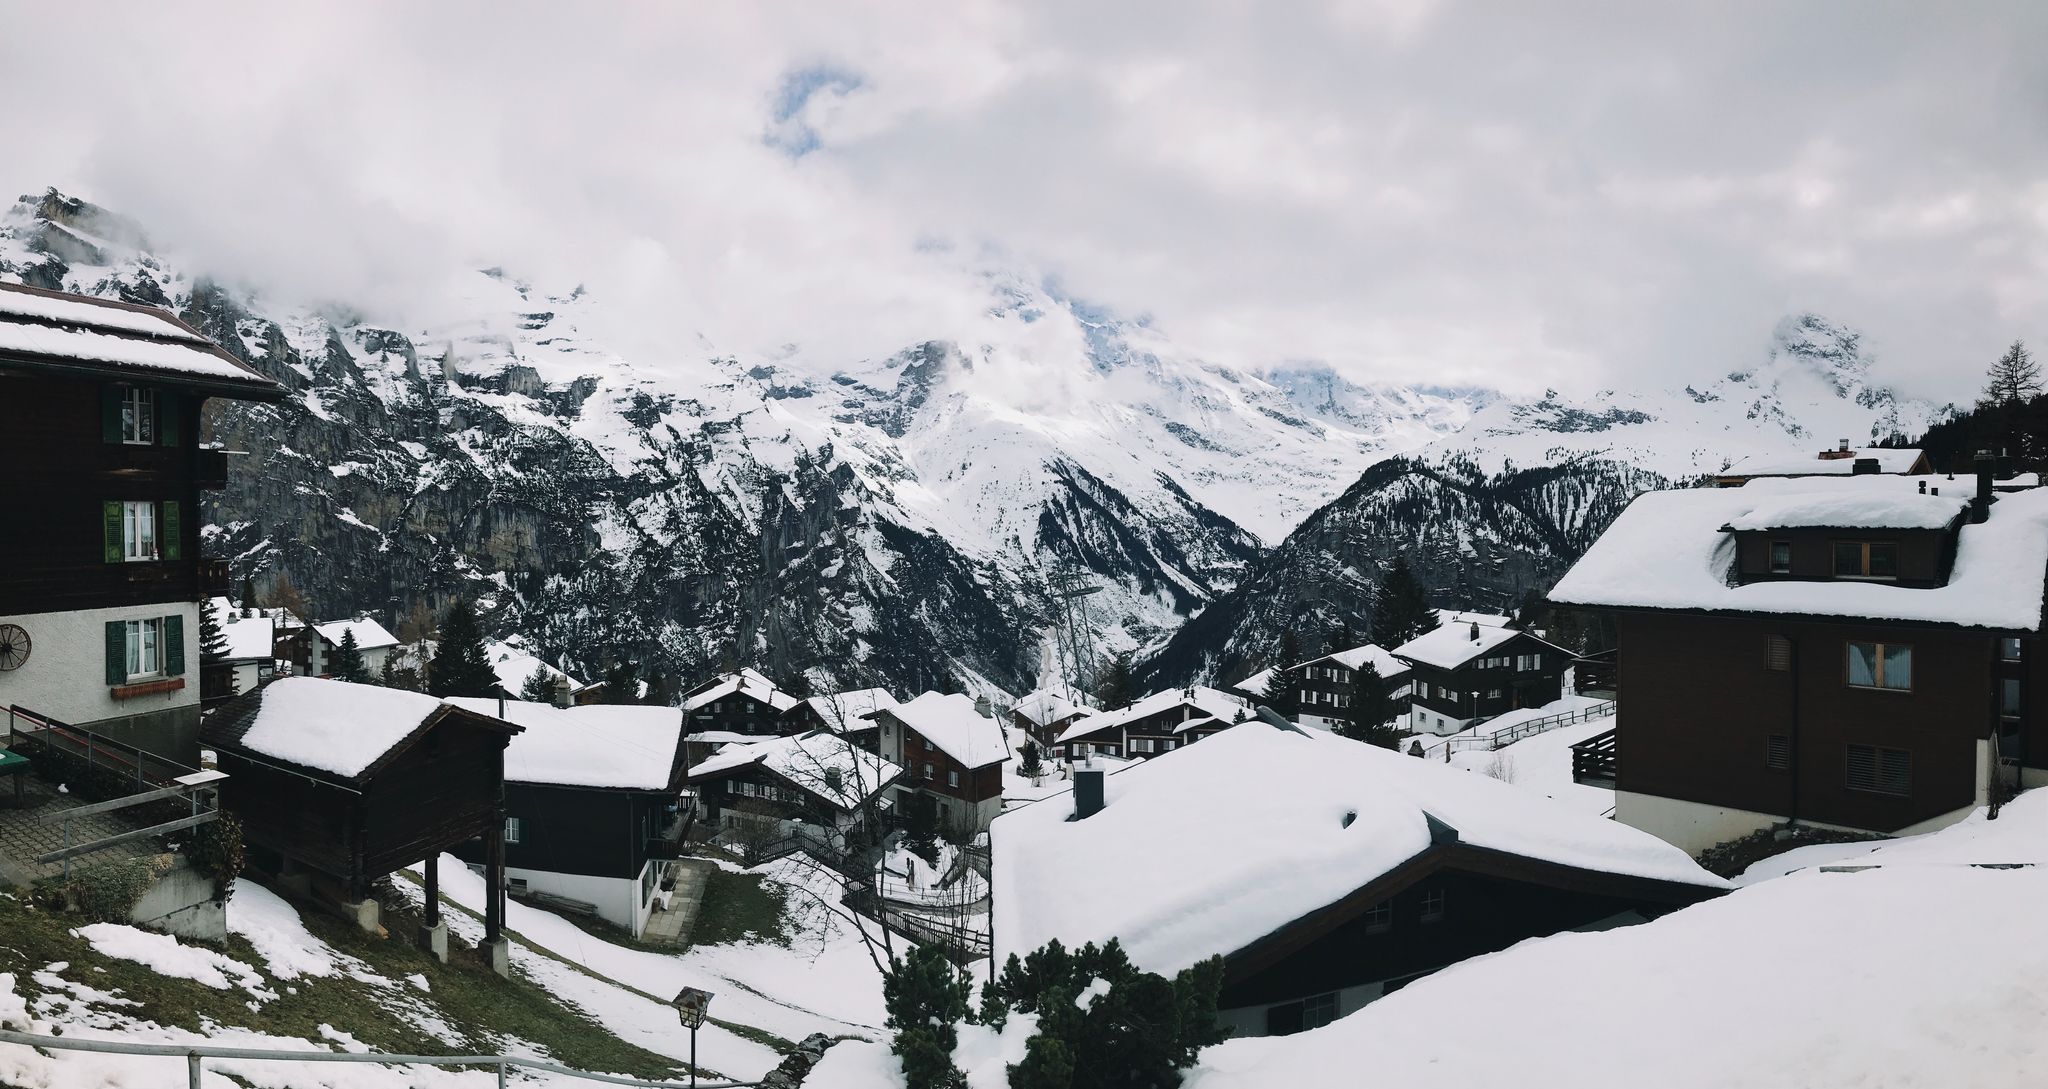 A view looking over a snow-covered set of houses with MASSIVE snow-covered mountains with their peaks covered by cloud in the background.